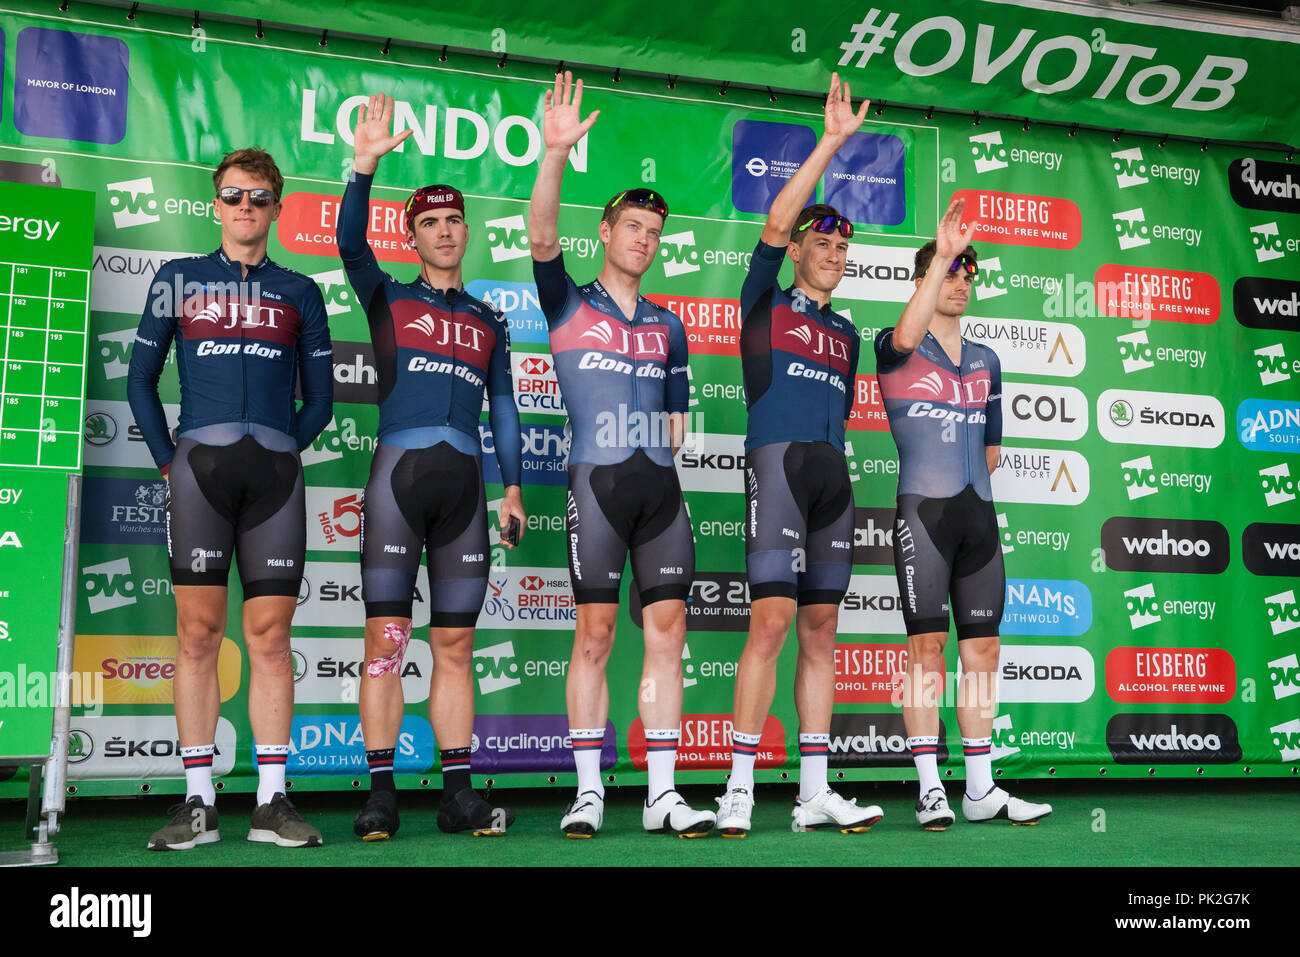 London, UK. 9th September, 2018. Riders from the JLT Condor team are presented before the 77km London Stage (Stage 8) of the OVO Energy Tour of Britain cycle race. Credit: Mark Kerrison/Alamy Live News Stock Photo